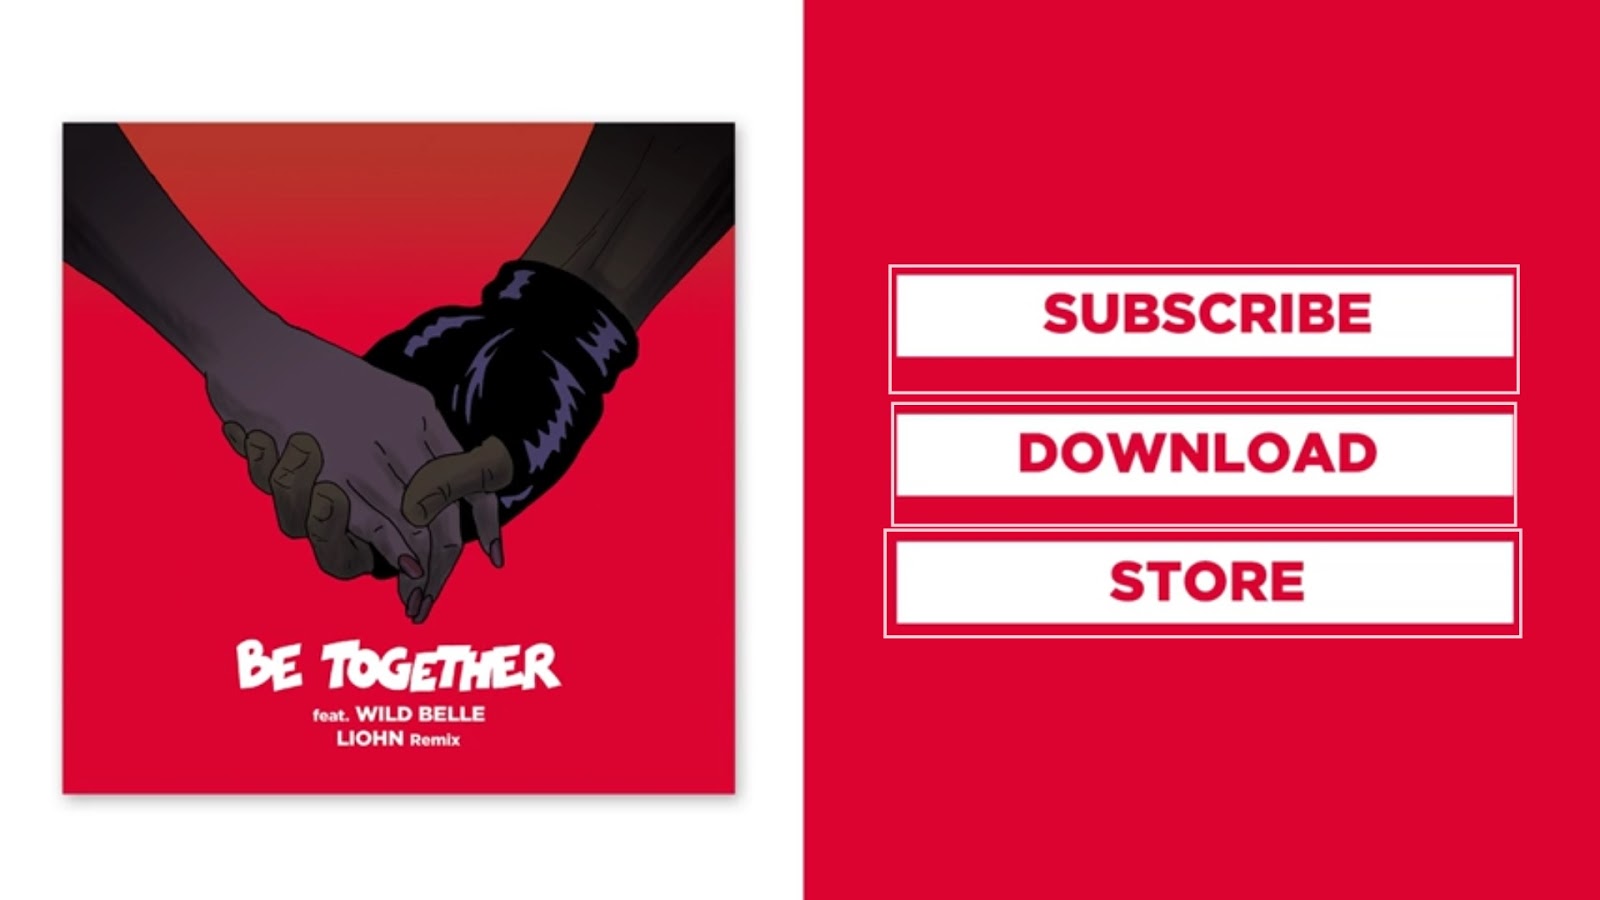 Be together Major Lazer. Be together (feat. Wild Belle) Major Lazer feat. Wild be. Been together. Be together текст.